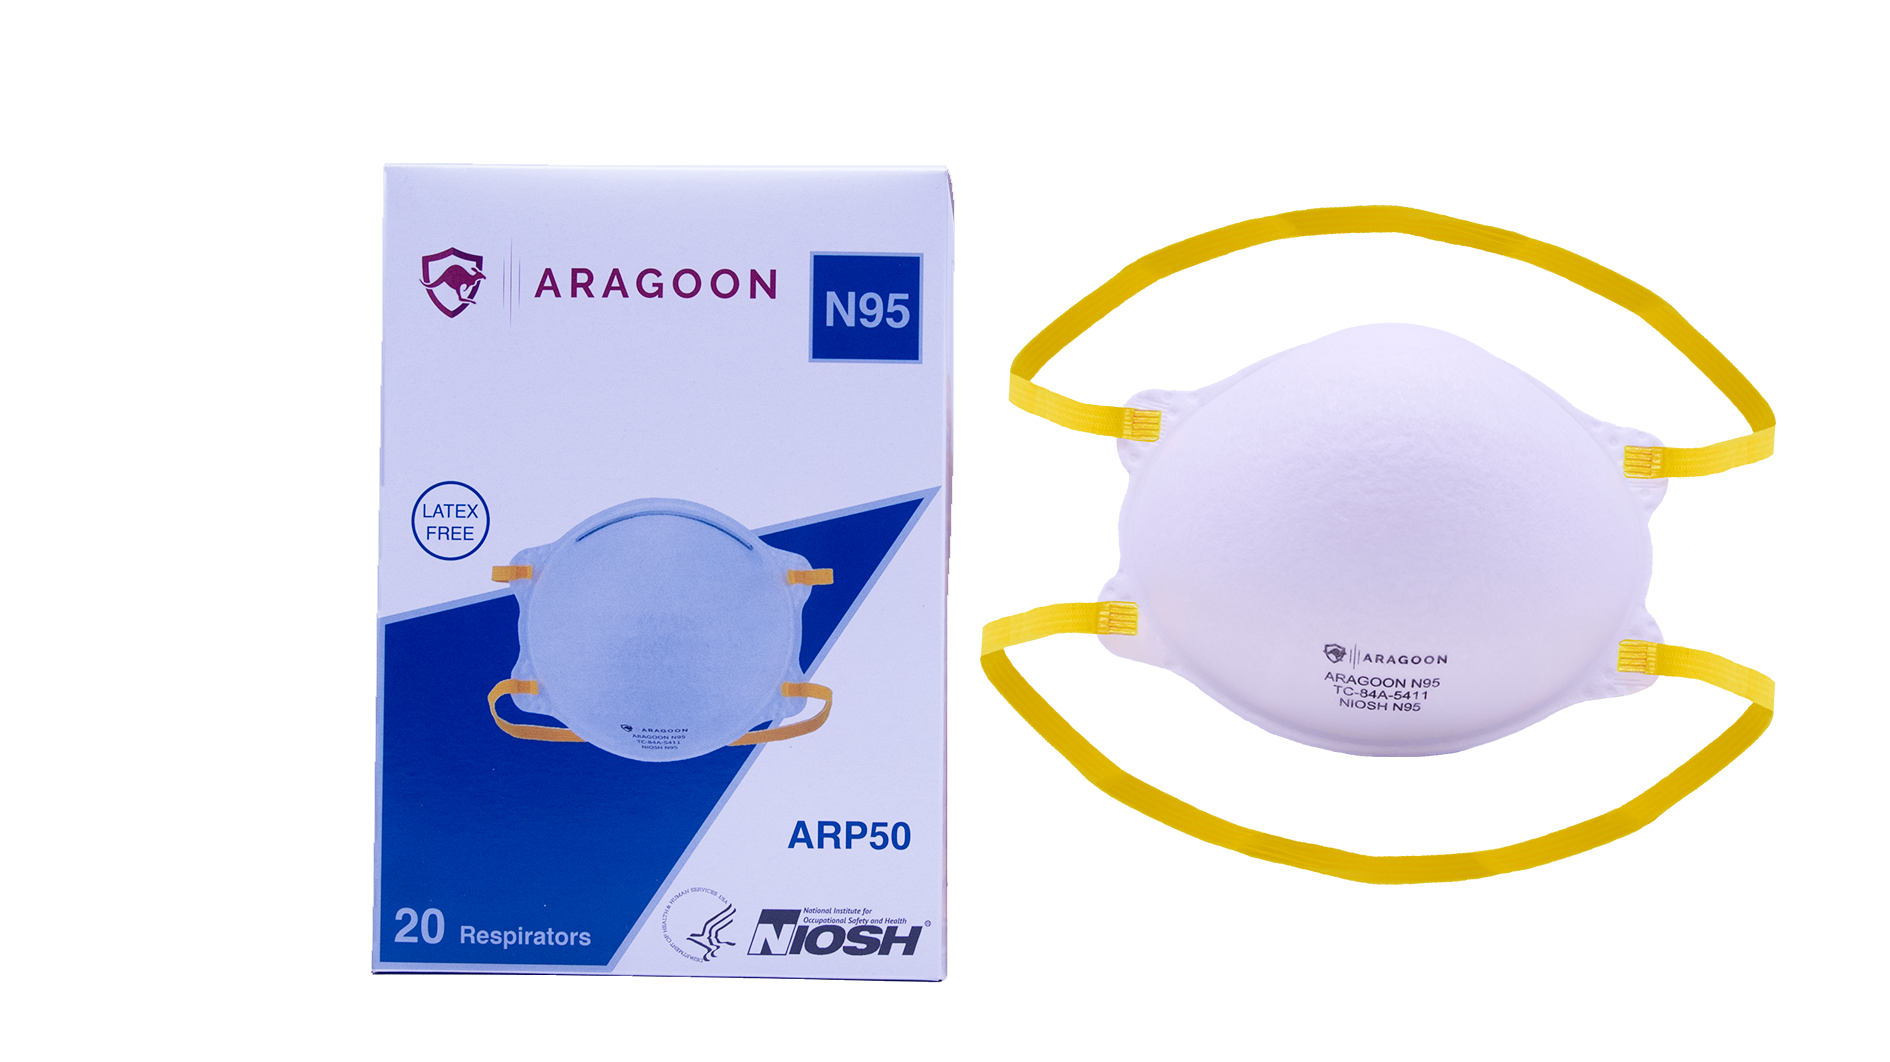 ARAGOON N95 Face Mask (ARP50) (Box of 20) Respirator N95 Mask Niosh PPE Safety Protection